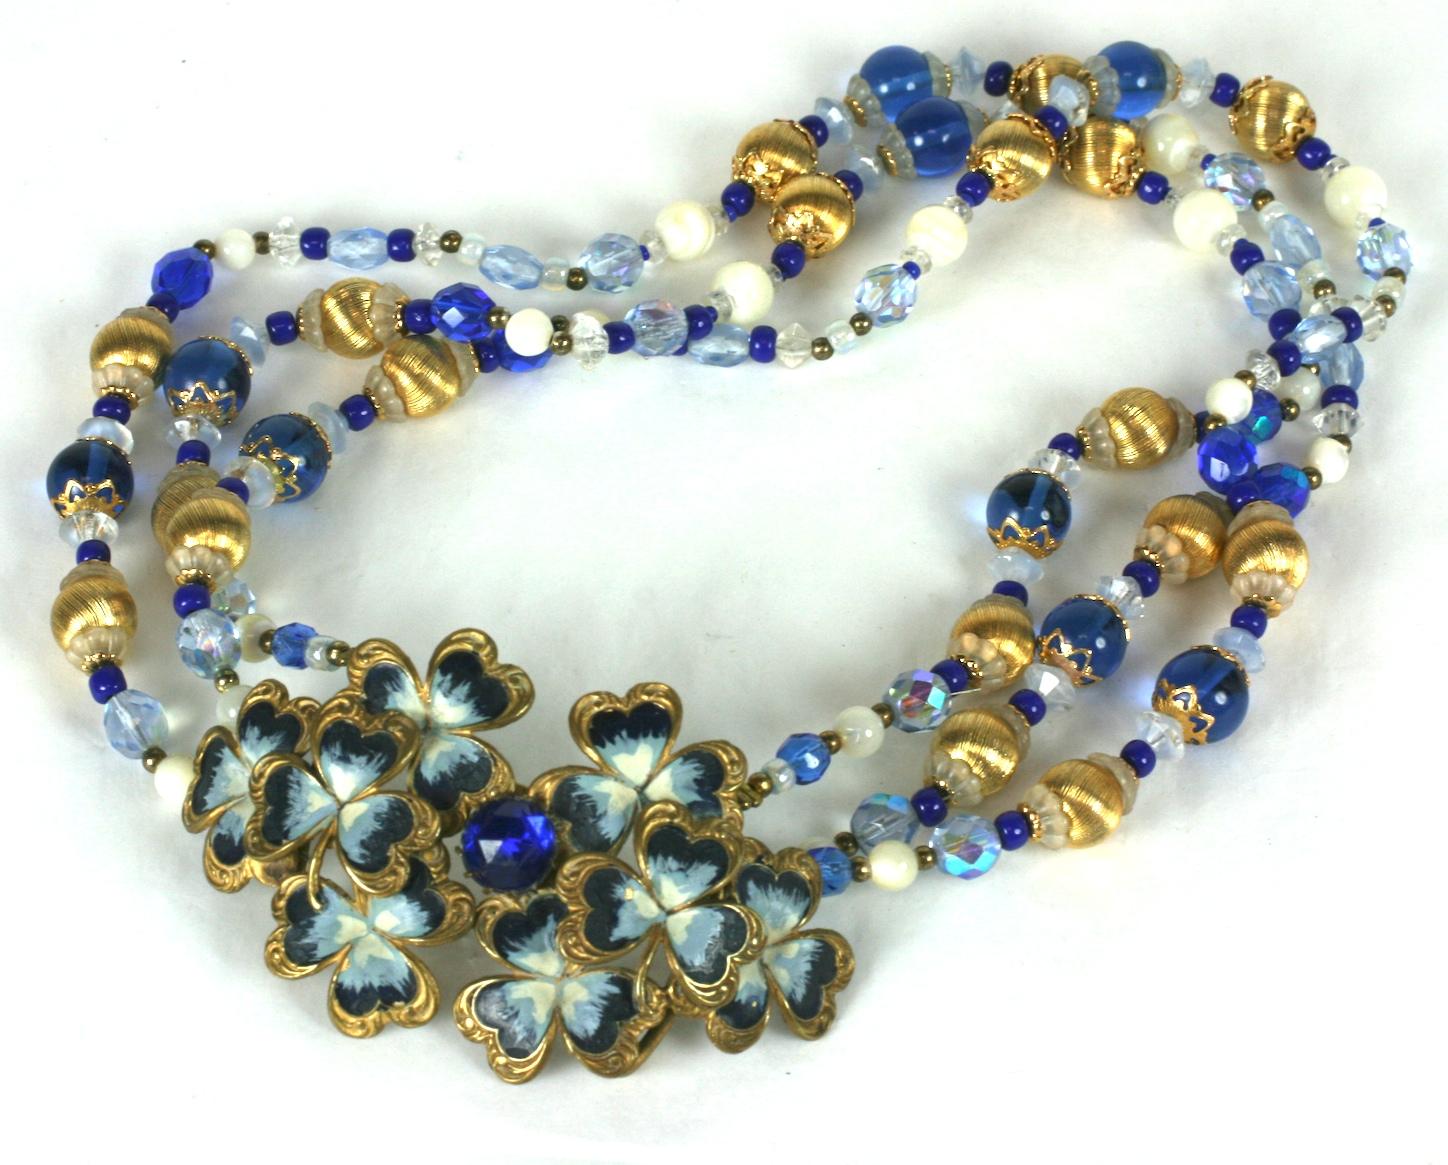 Attractive Upcycled Bead Necklace with Victorian Enamel Buckle. Artisan manufactured with a Victorian enameled clover motif buckle with sapphire paste, married to more contemporary and matching gilt, crystal, aurora, jet and sapphire glass beads.